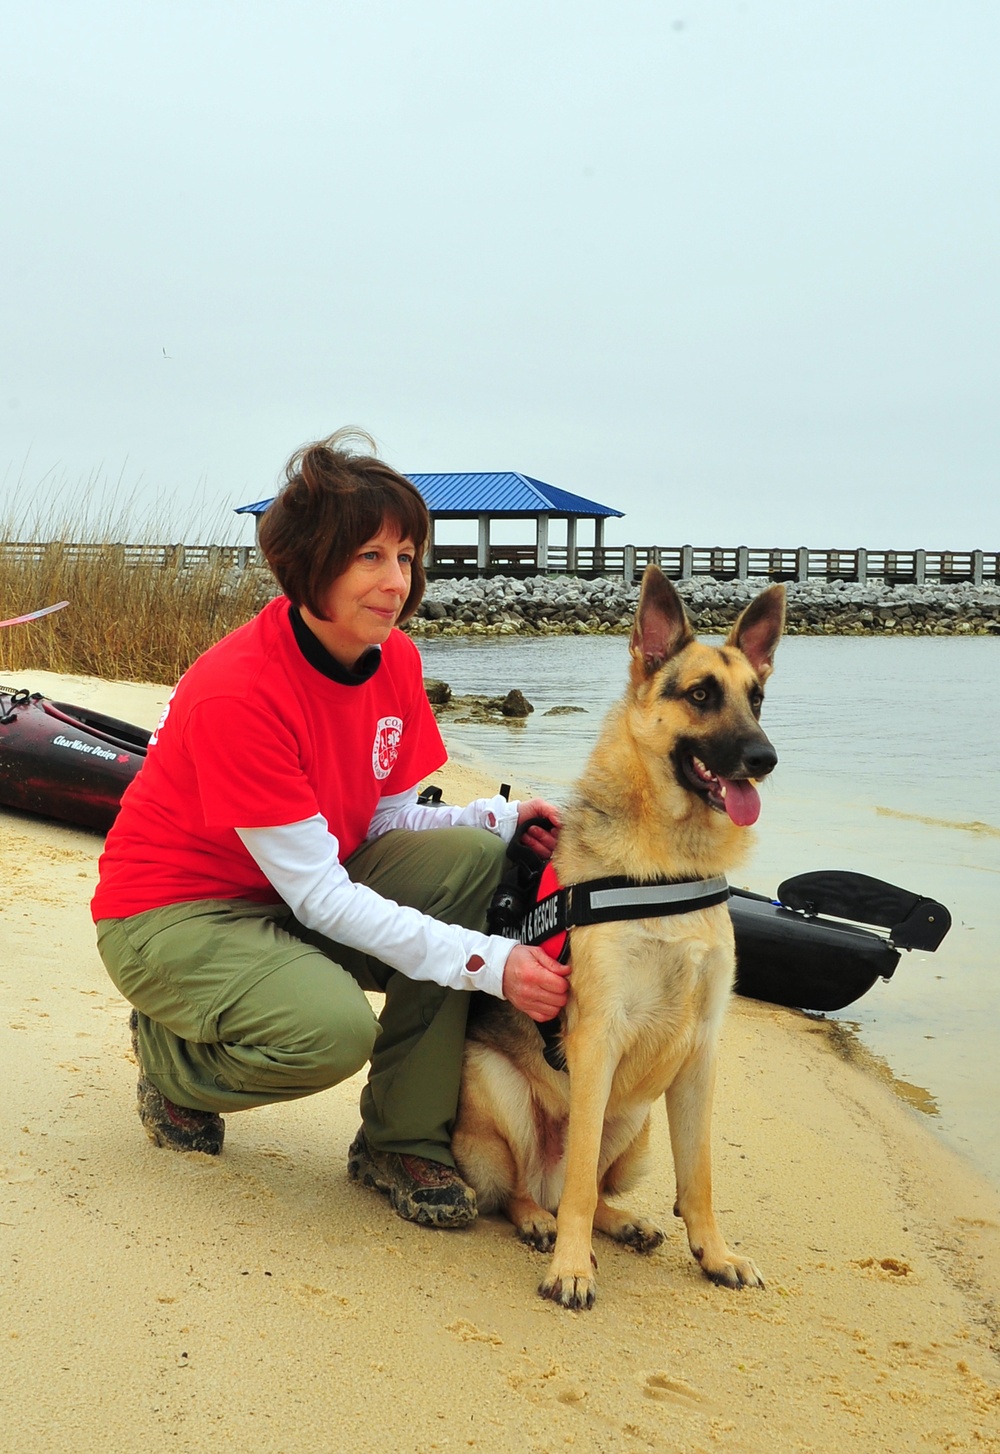 Rescue hero: Reservist volunteers with Gulf Coast Search and Rescue